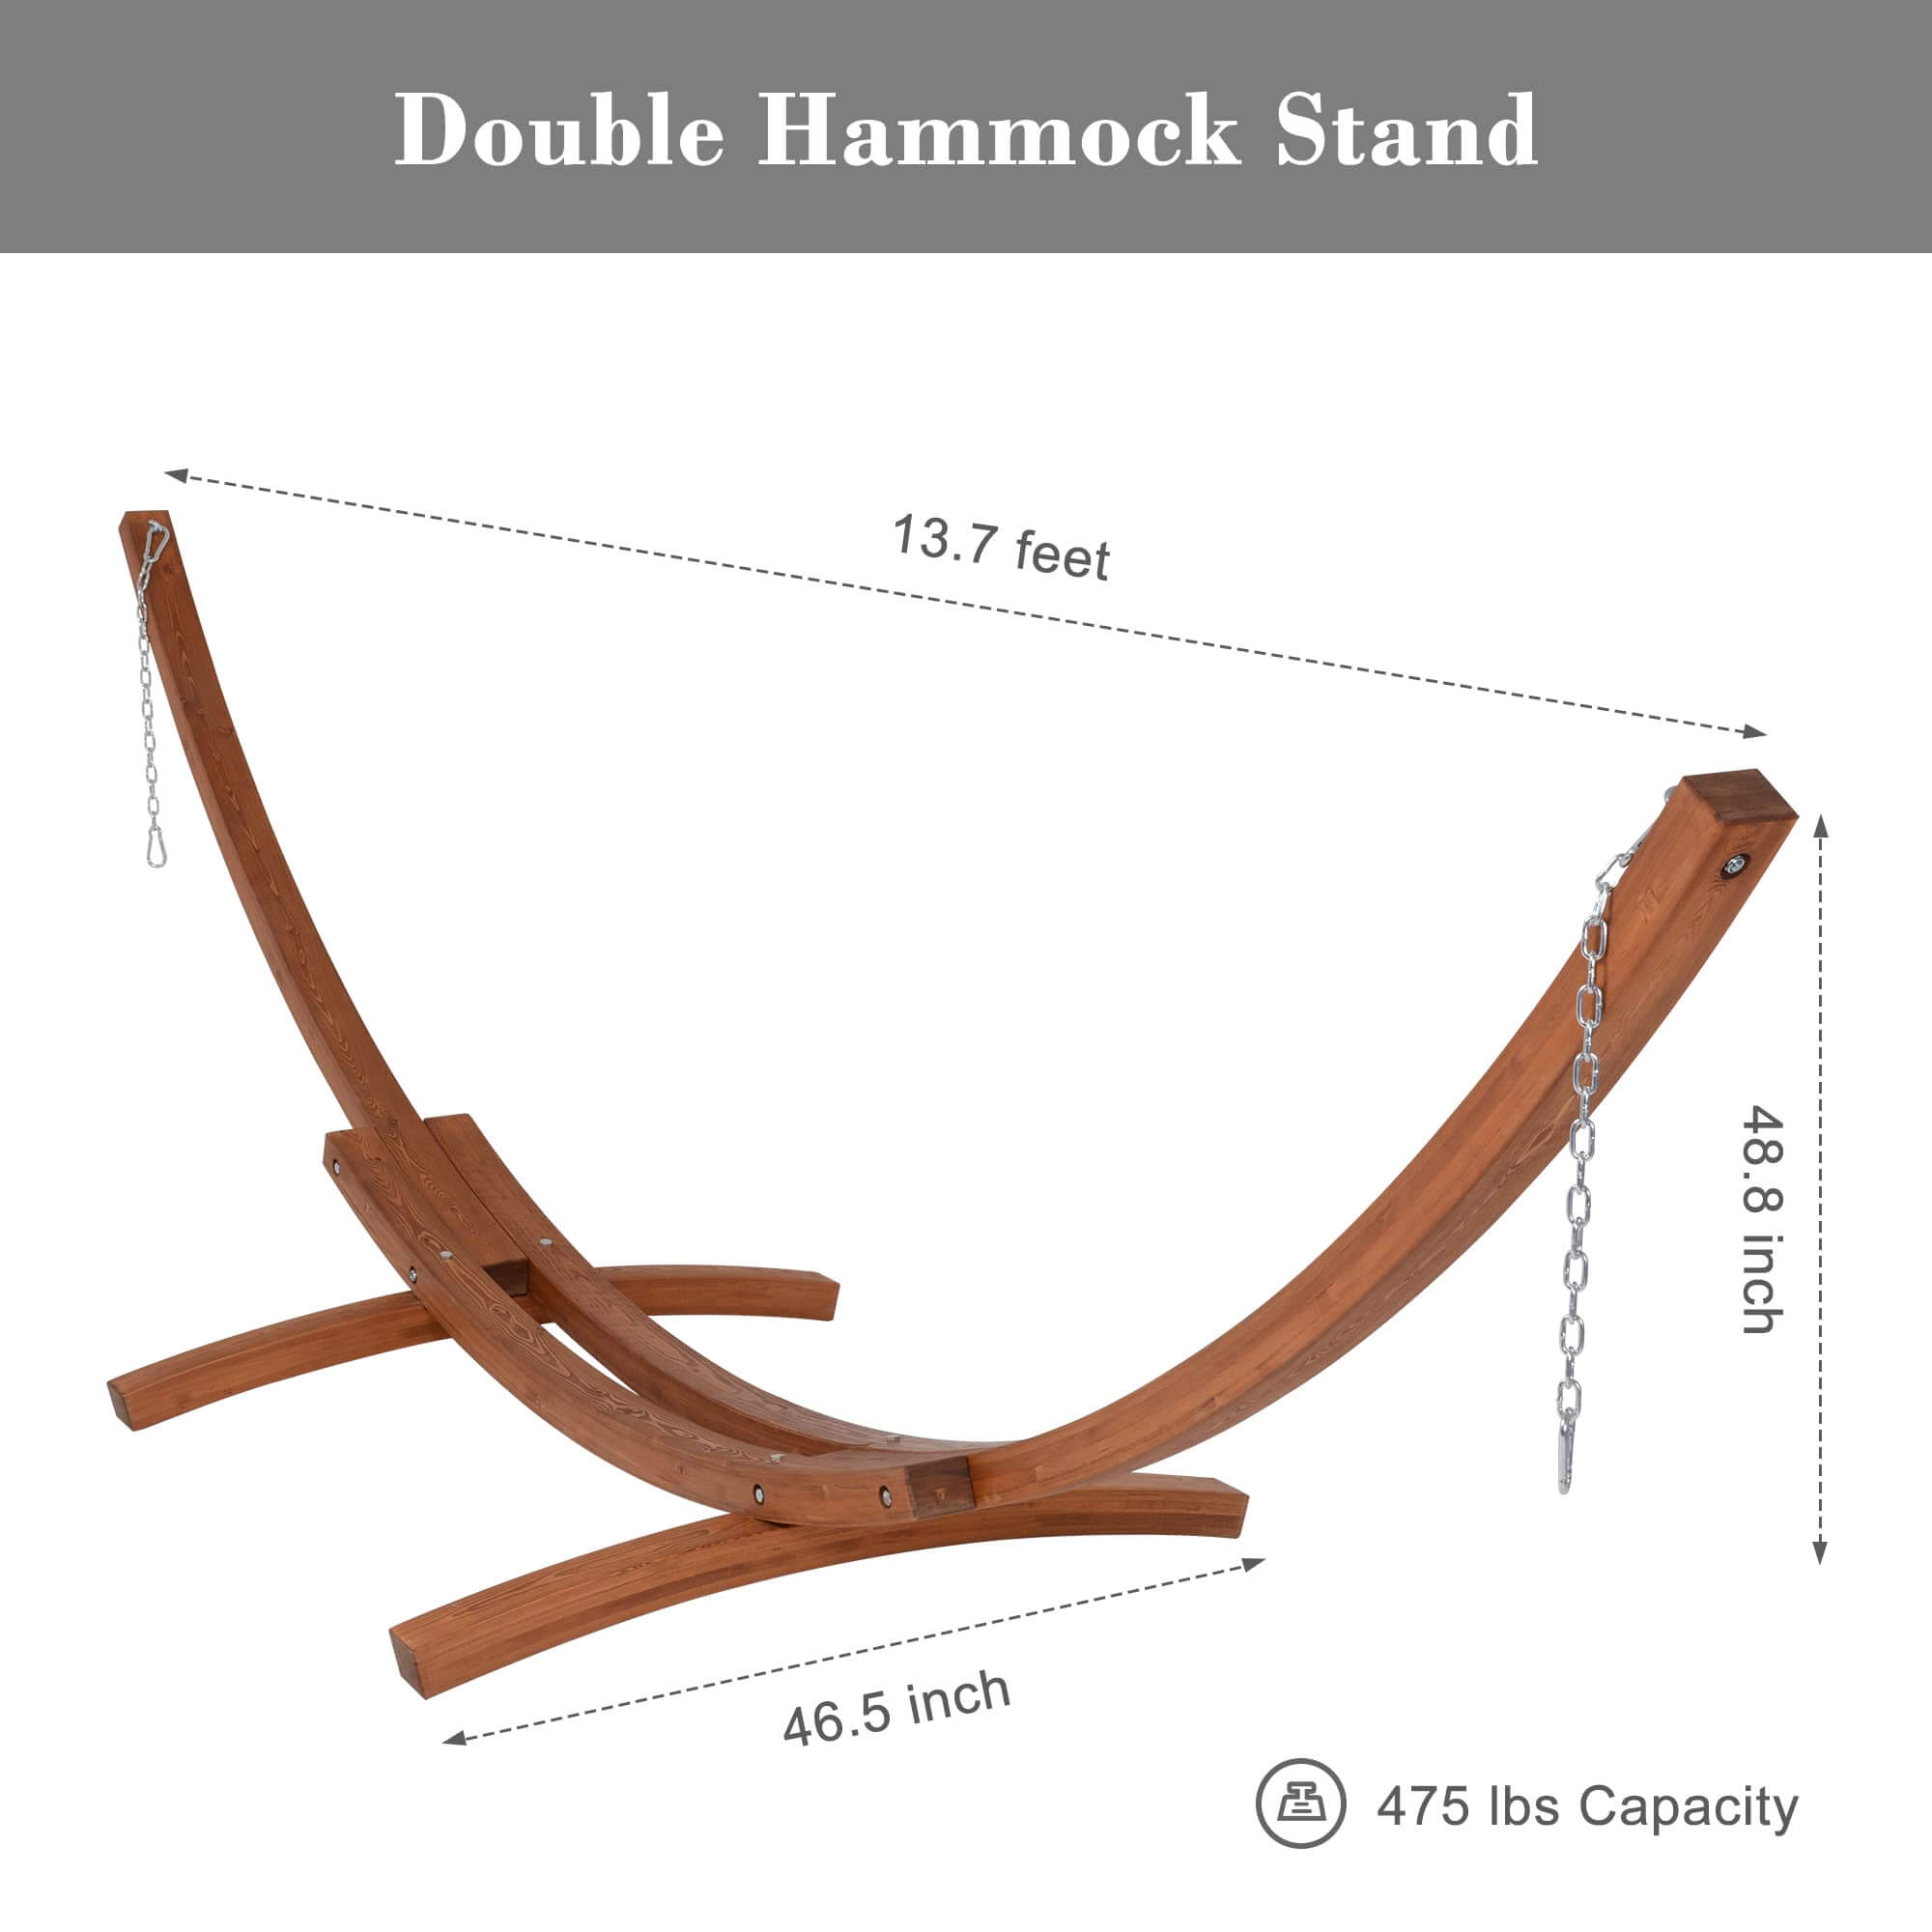 SUNCREAT-outdoor-double-quilted-hammock-with-stand#color_blue-pattern